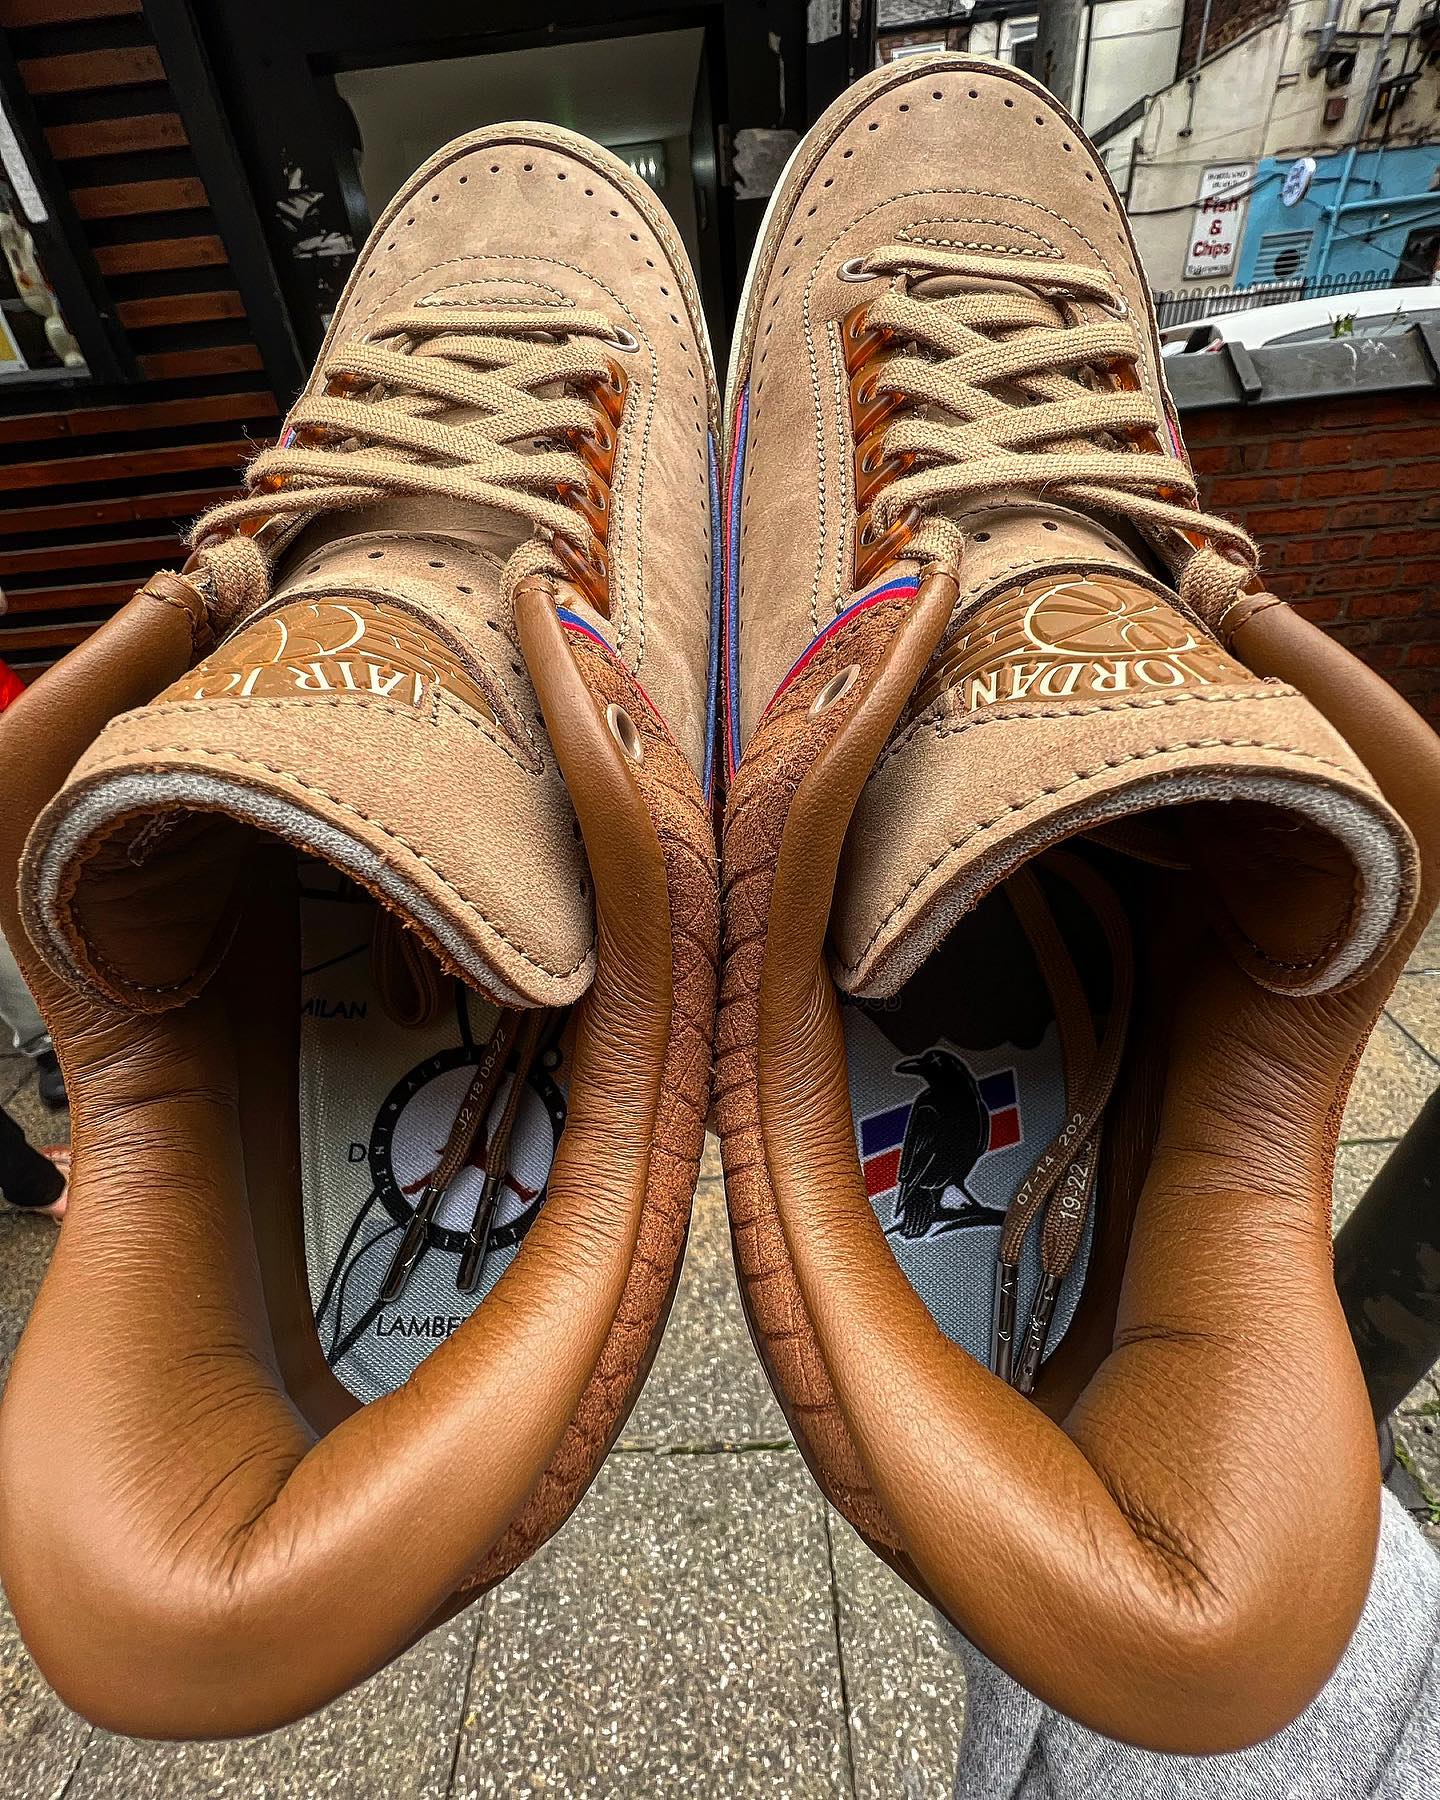 Two 18 x Air Jordan 2 Low Insole